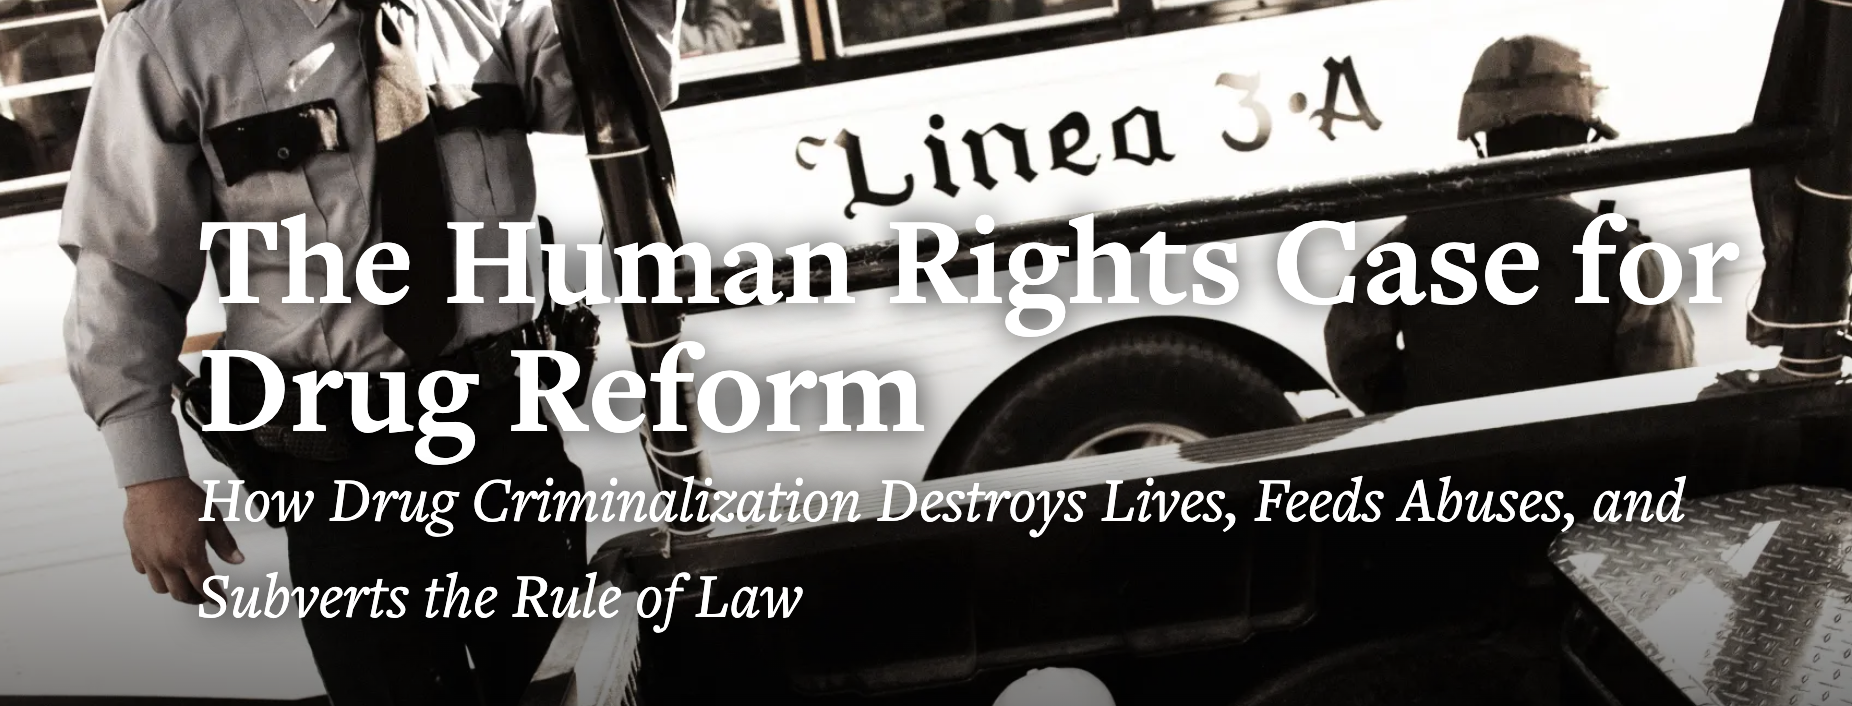 The Human Rights Case for Drug Reform